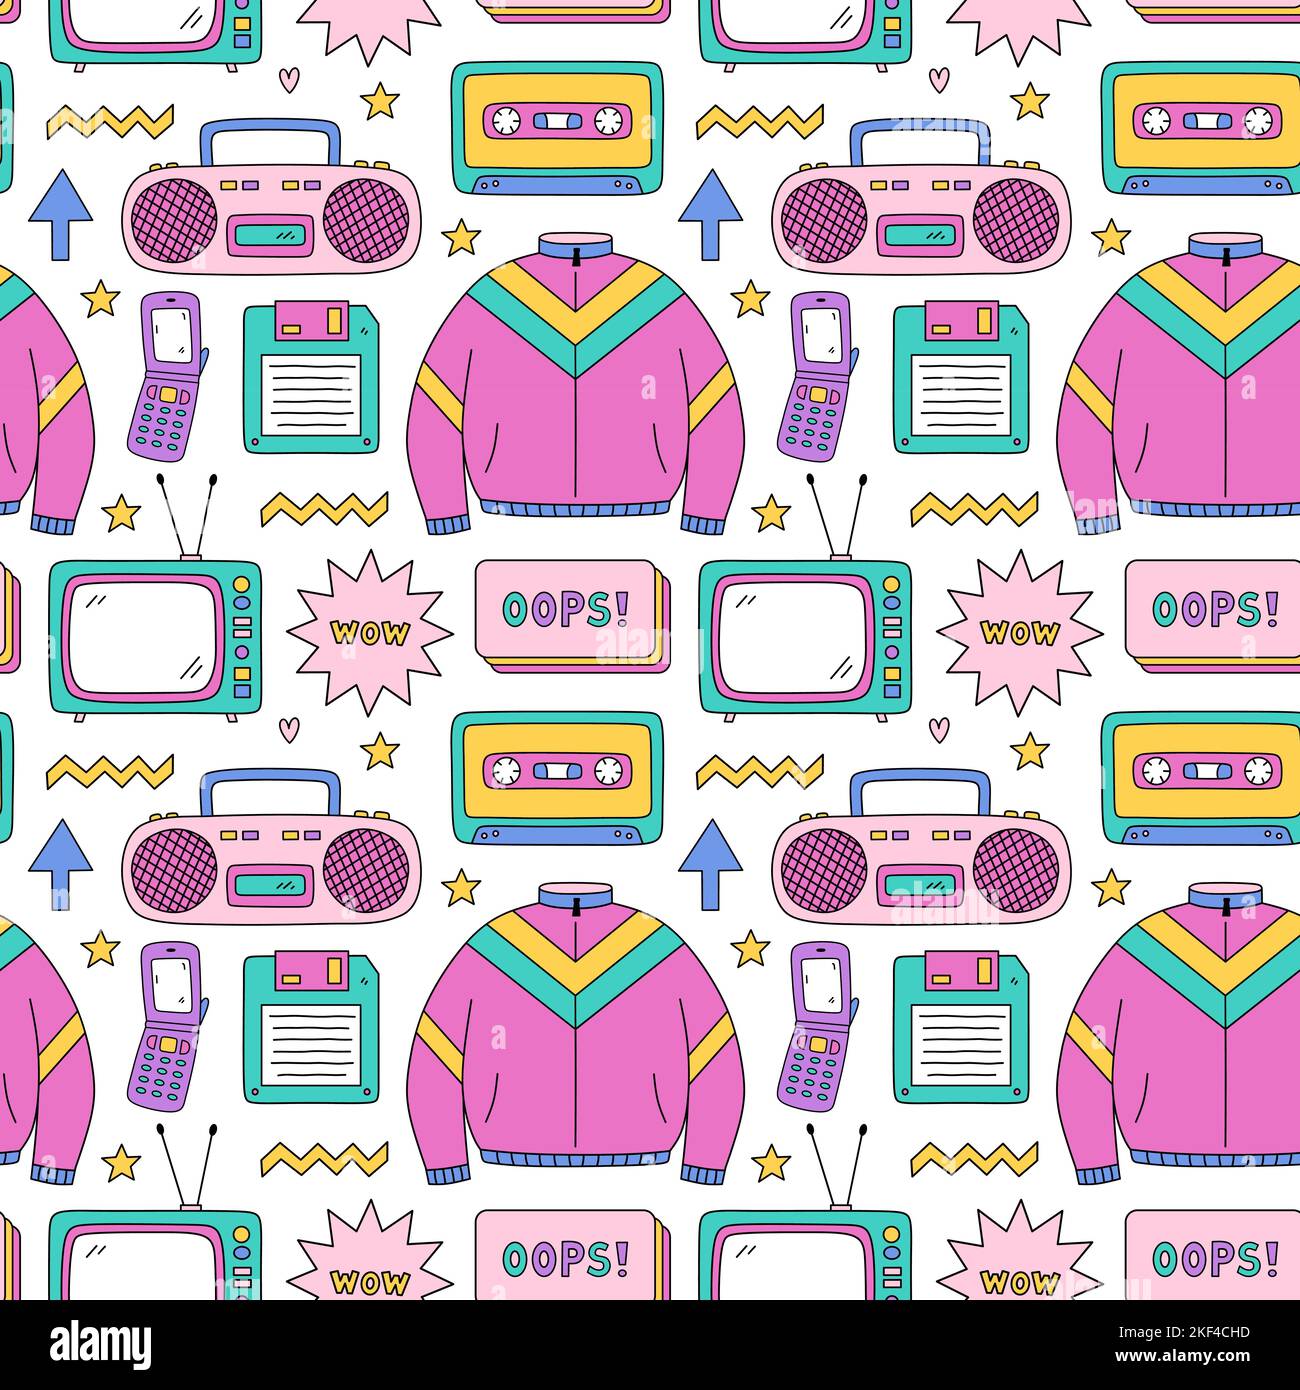 Bright seamless pattern with items from the nineties - retro cassette tape and music boombox, sports jacket, flip phone, floppy disk, tv and stars on white background. Nostalgia for the 1990s. Stock Vector